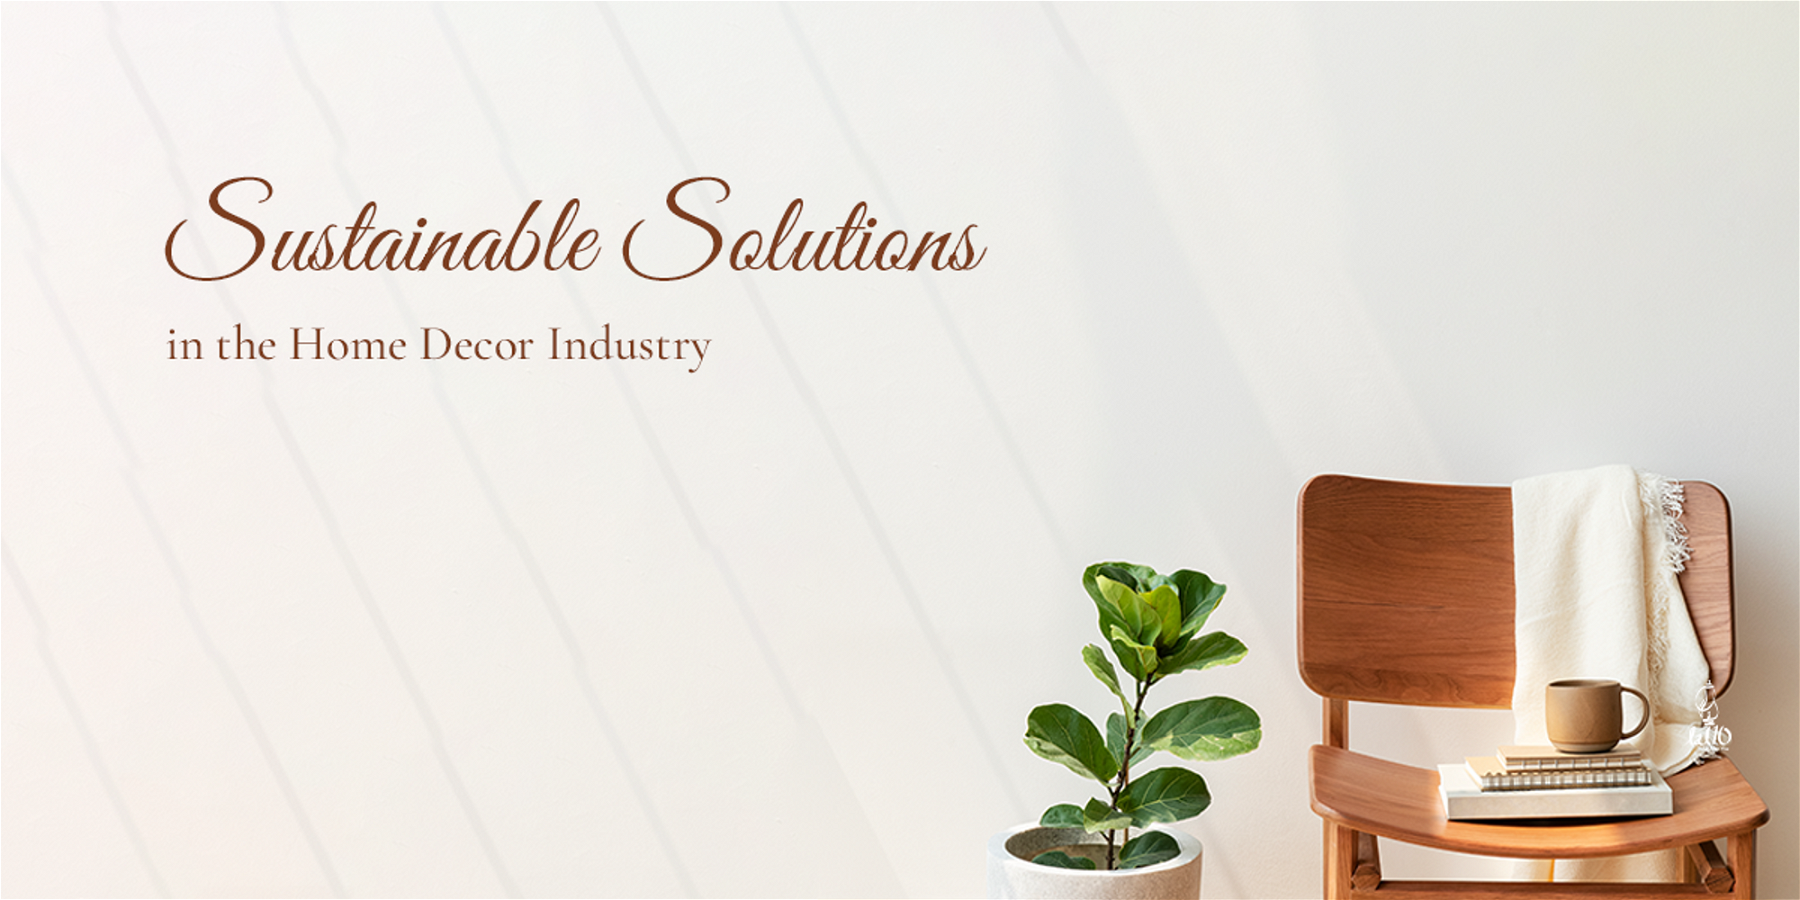 Sustainable Solutions in the Home Decor Industry